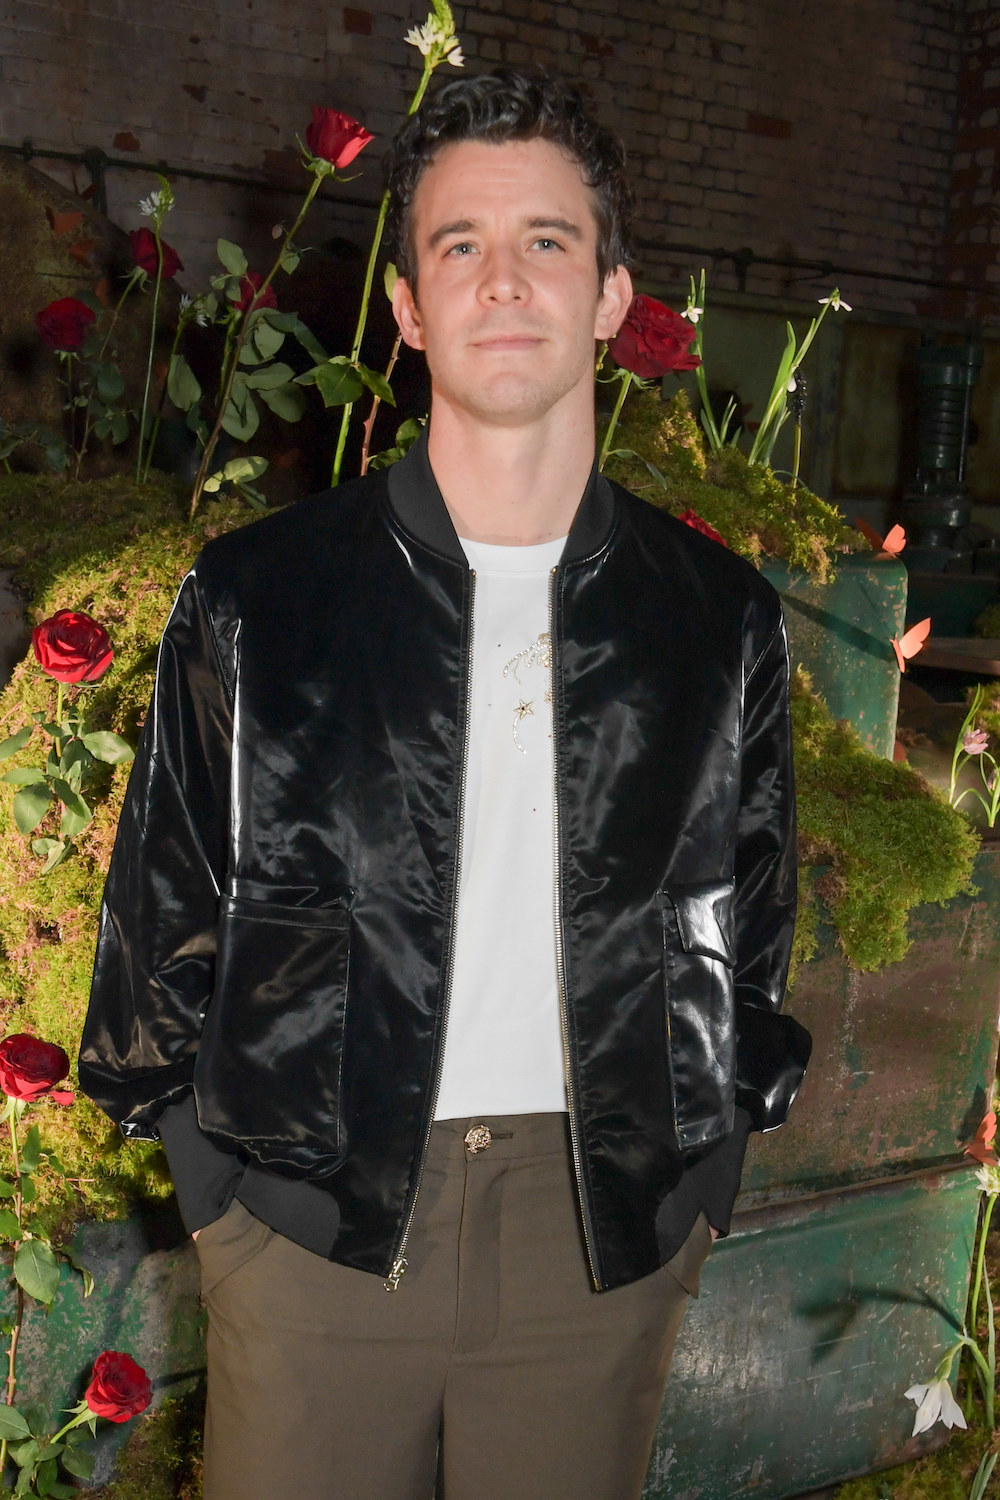 Luke posing in a casual jacket at an event